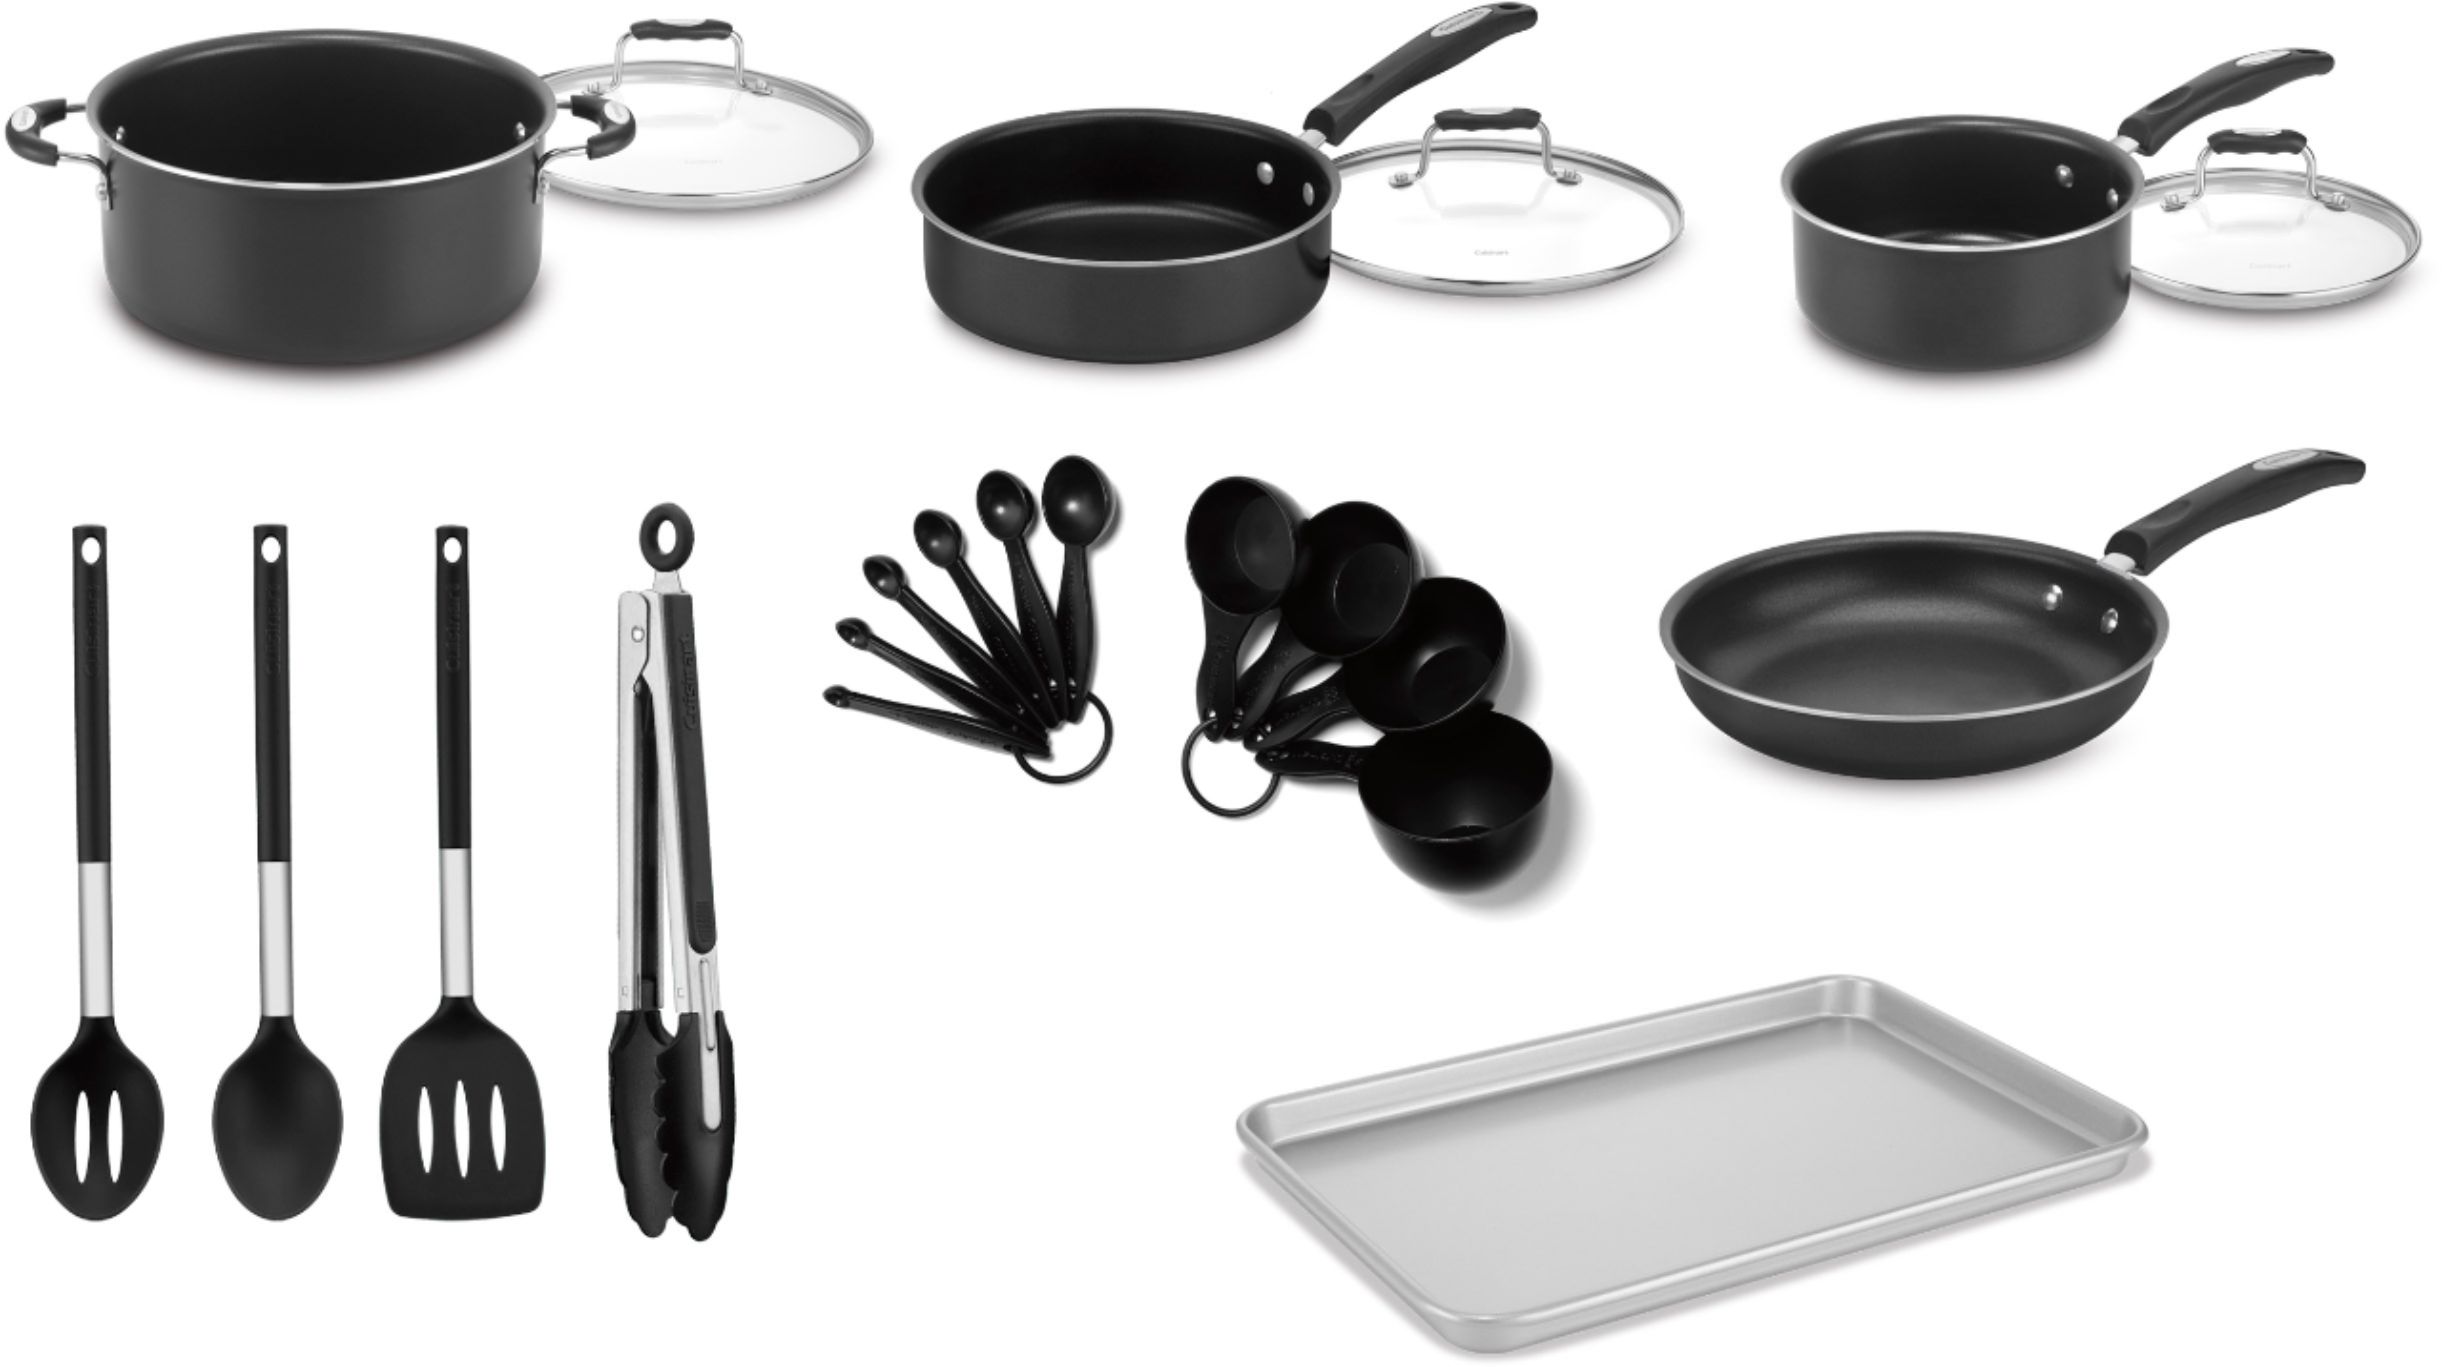 BEST BUY - 22 Piece Professional Chef's Cutlery Set in Case